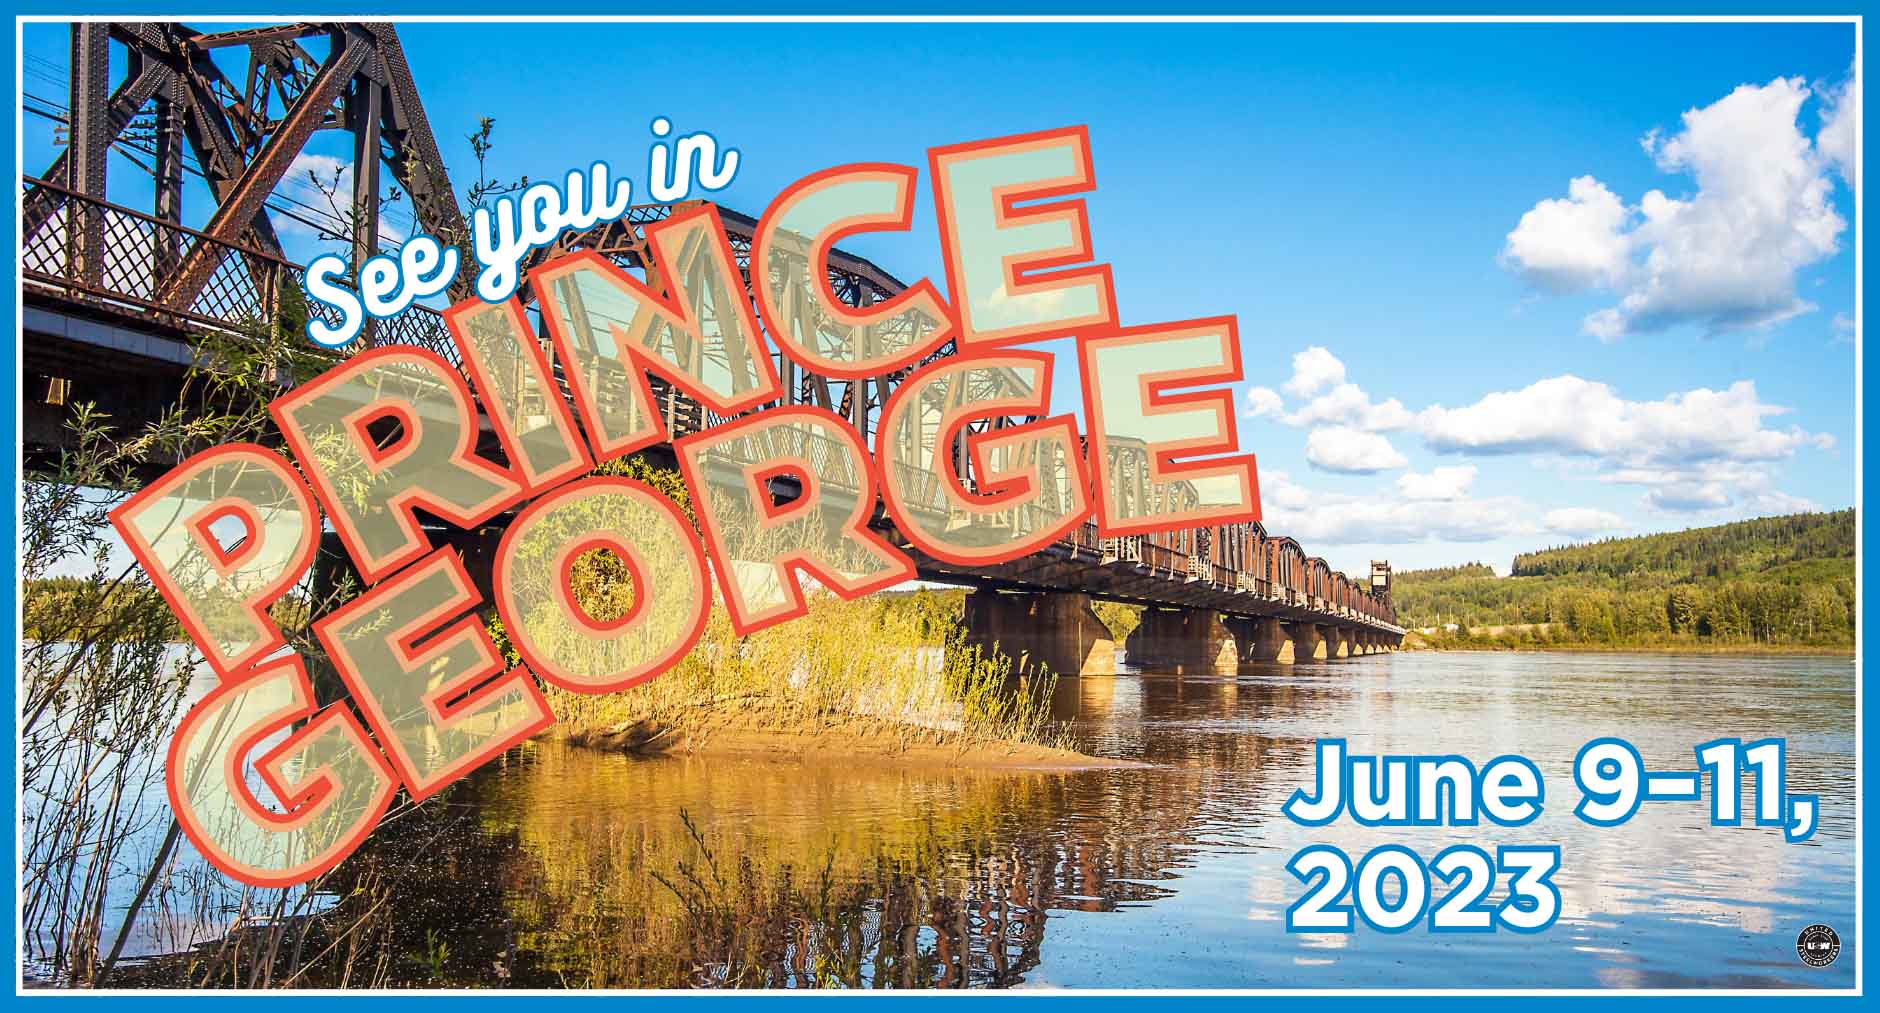 Photo of a rail bridge over a river. Text reads 'Prince George - June 9-11, 2023